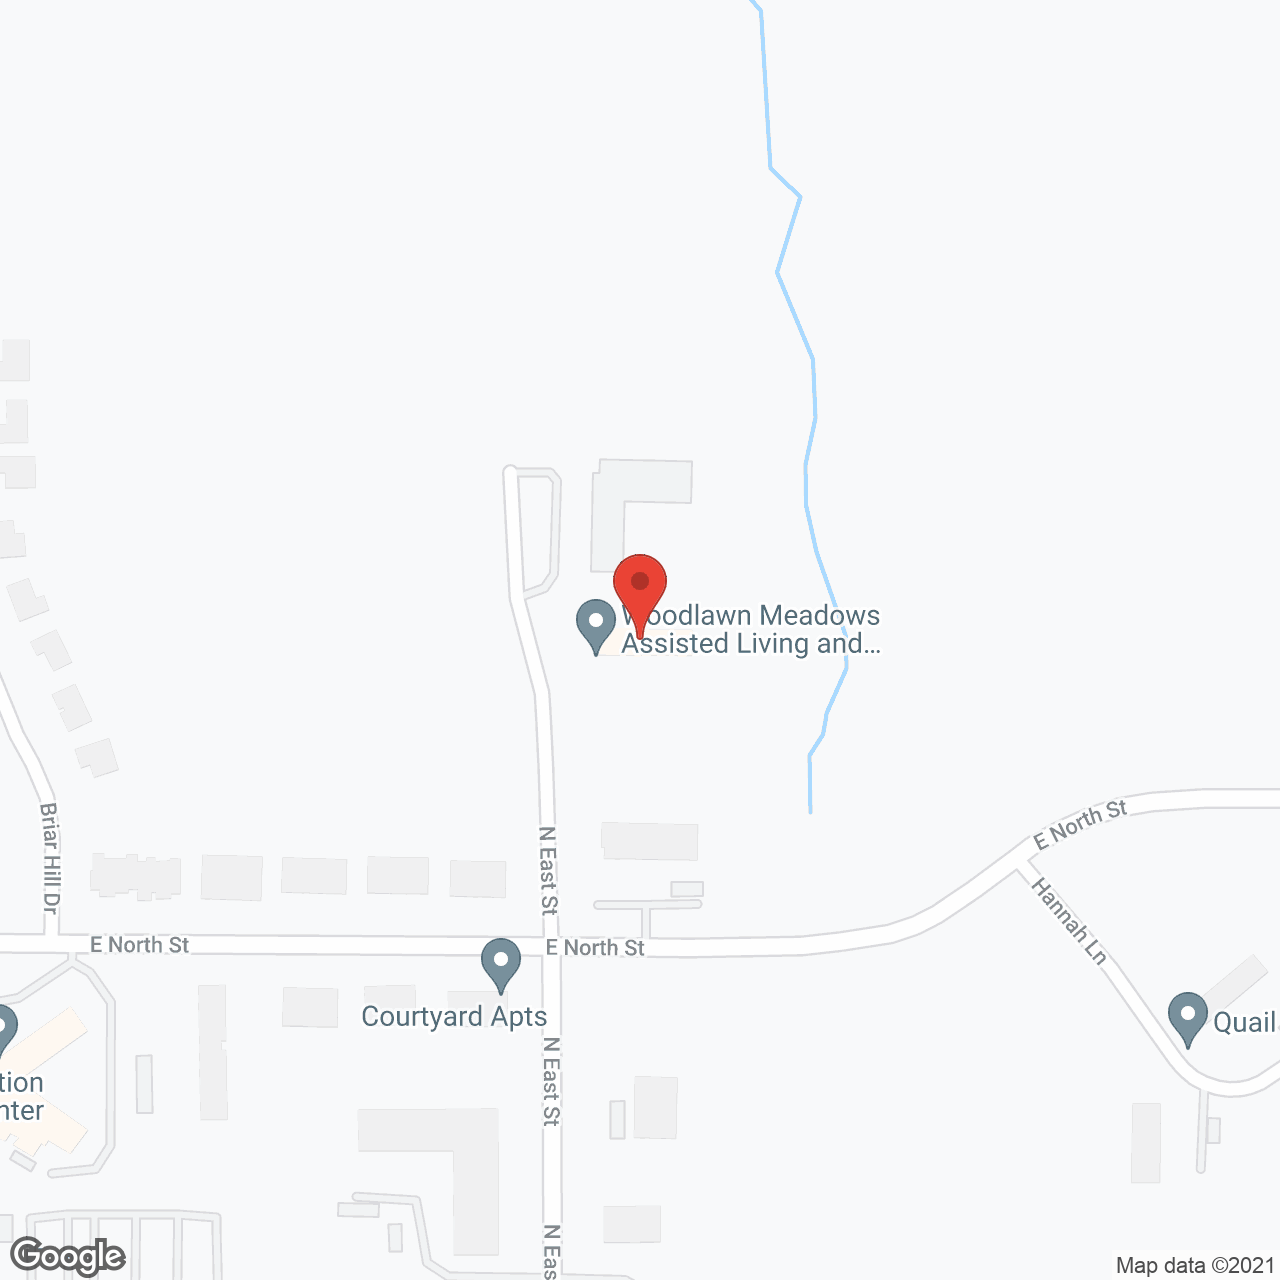 Woodlawn Meadows Assisted Living & Memory Care in google map